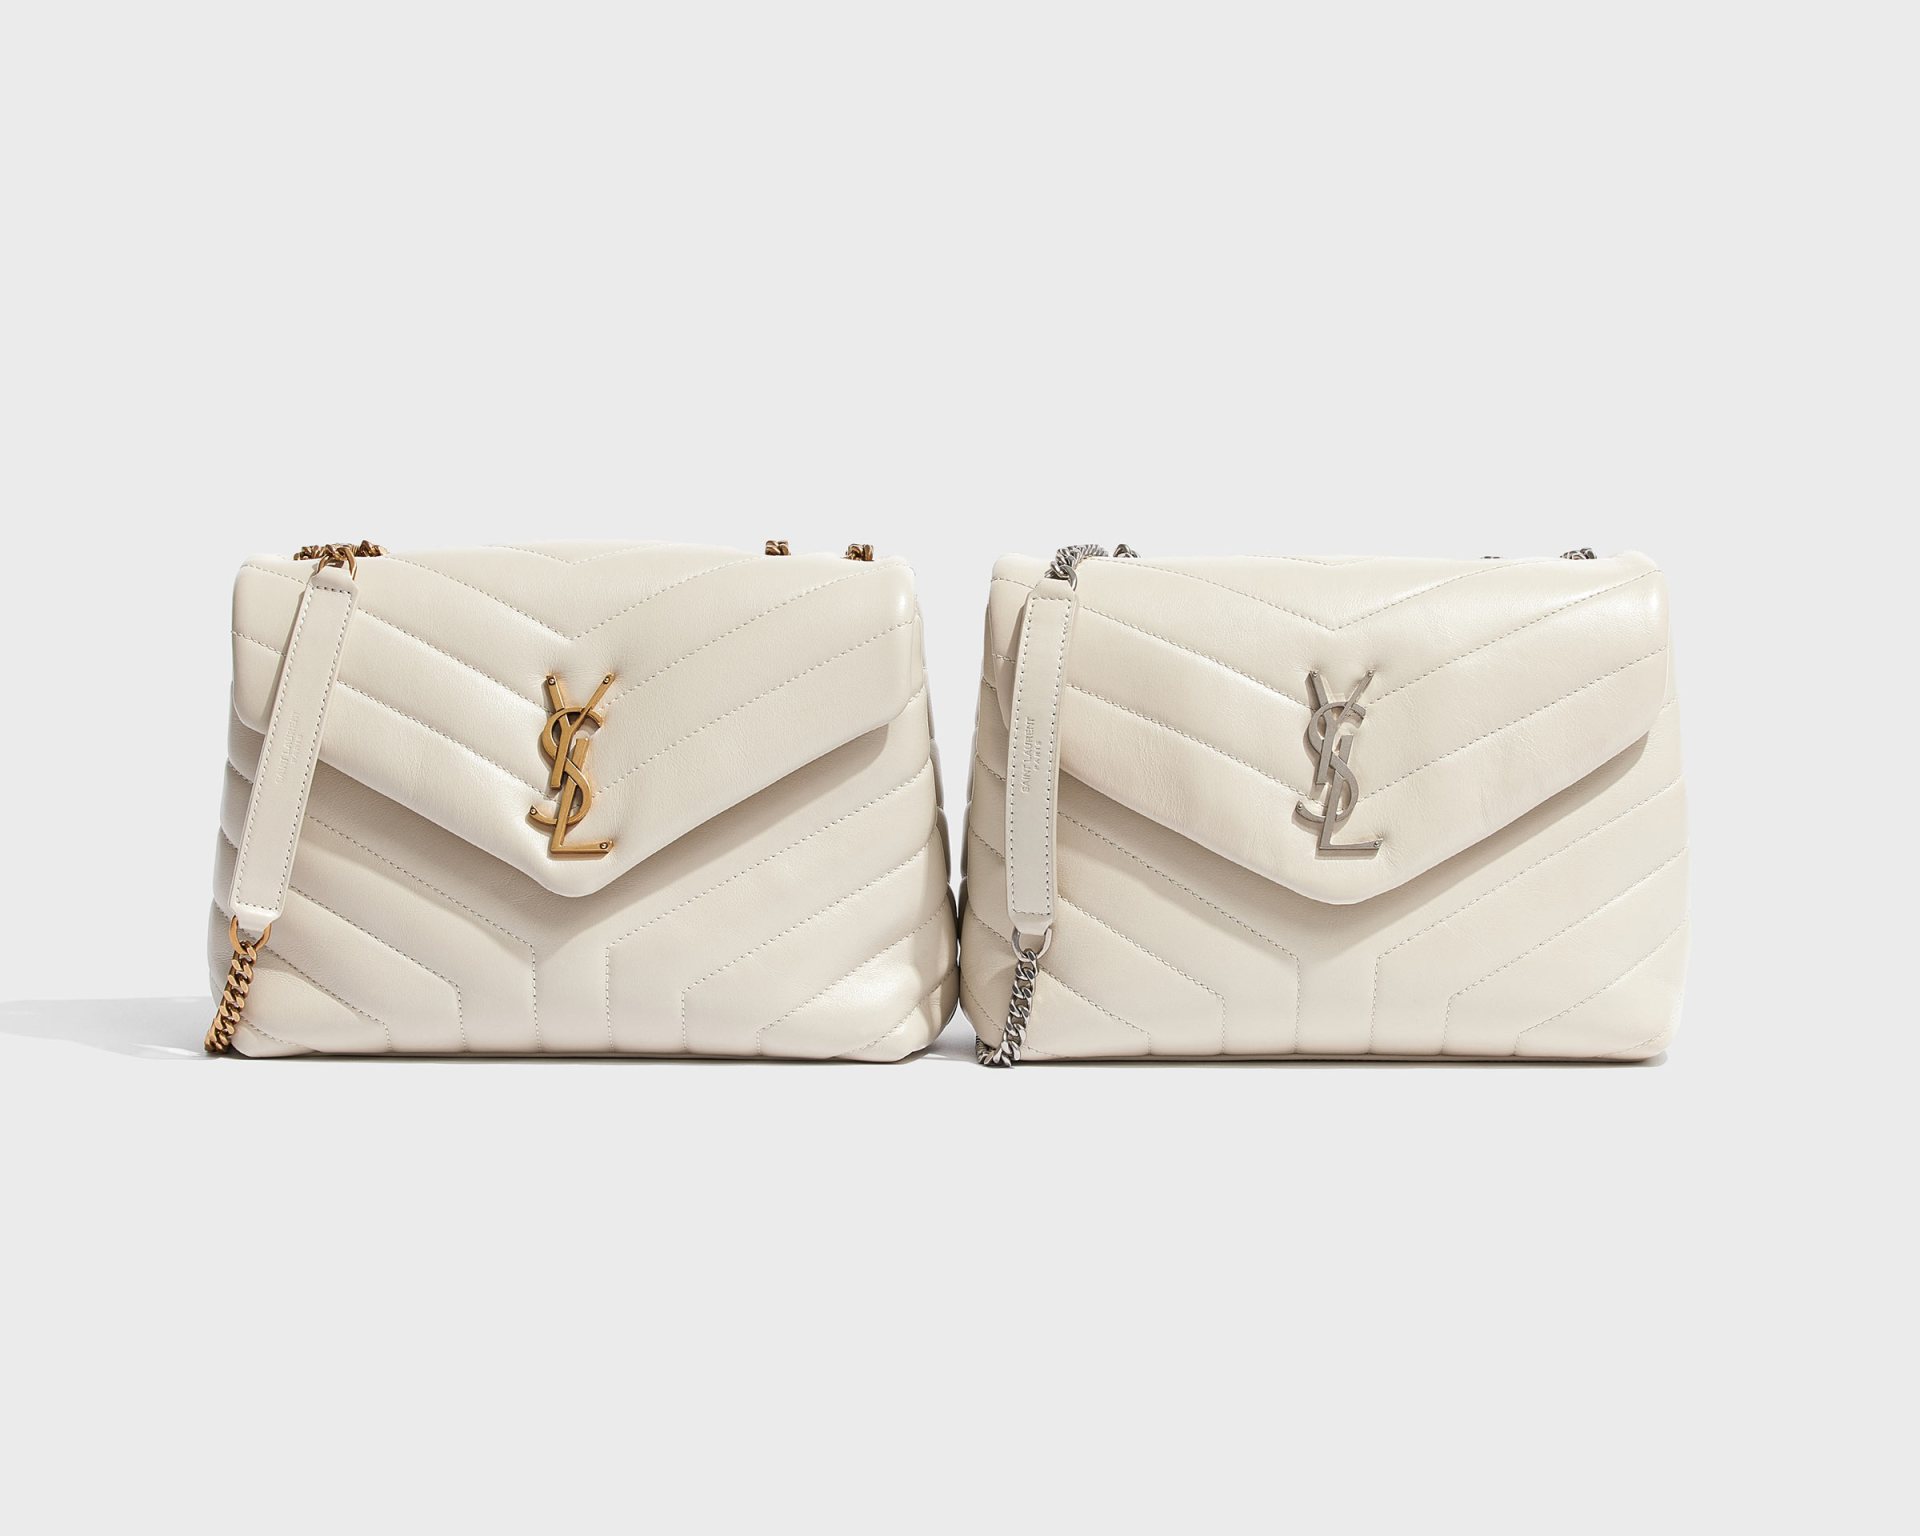 product image of real and fake saint laurent loulou satchel bag side by side FASHIONPHILE